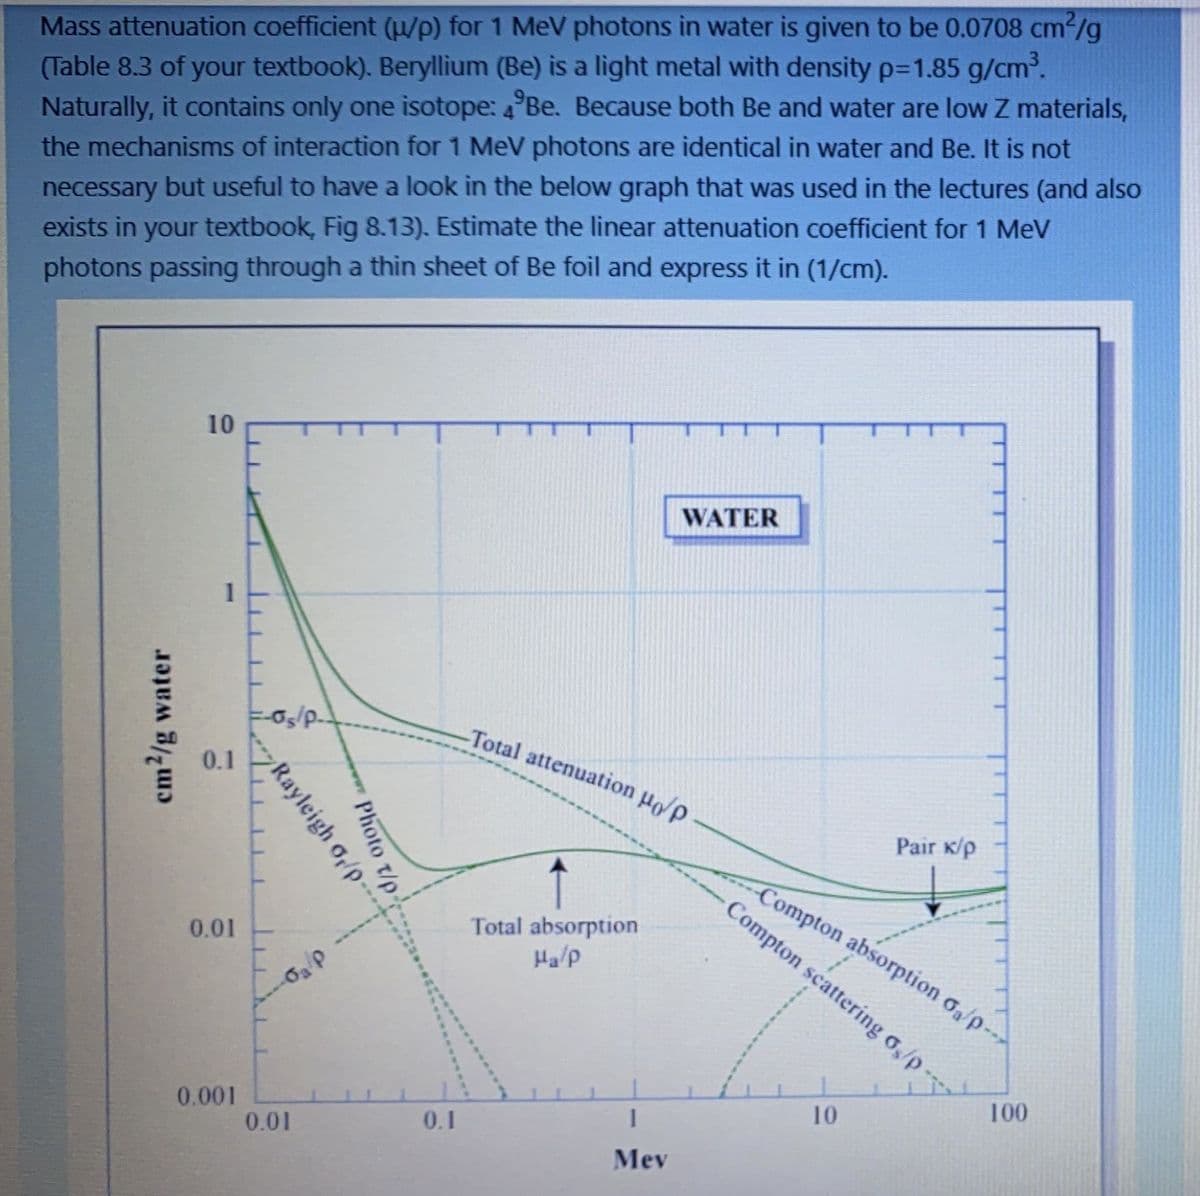 Mass attenuation coefficient (u/p) for 1 MeV photons in water is given to be 0.0708 cm2/g
(Table 8.3 of your textbook). Beryllium (Be) is a light metal with density p-D1.85 g/cm.
Naturally, it contains only one isotope: 4 Be. Because both Be and water are low Z materials,
the mechanisms of interaction for 1 MeV photons are identical in water and Be. It is not
necessary but useful to have a look in the below graph that was used in the lectures (and also
exists in your textbook, Fig 8.13). Estimate the linear attenuation coefficient for 1 MeV
photons passing through a thin sheet of Be foil and express it in (1/cm).
10
WATER
Os/p.
Total attenuation µop
0.1
Pair K/p
Compton absorption o/p-->
Compton scattering o,/p
Total absorption
Ha/p
0.01
100
10
0.001
0.01
0.1
Mev
wPhoto t/p
Rayleigh o,/p--
water
